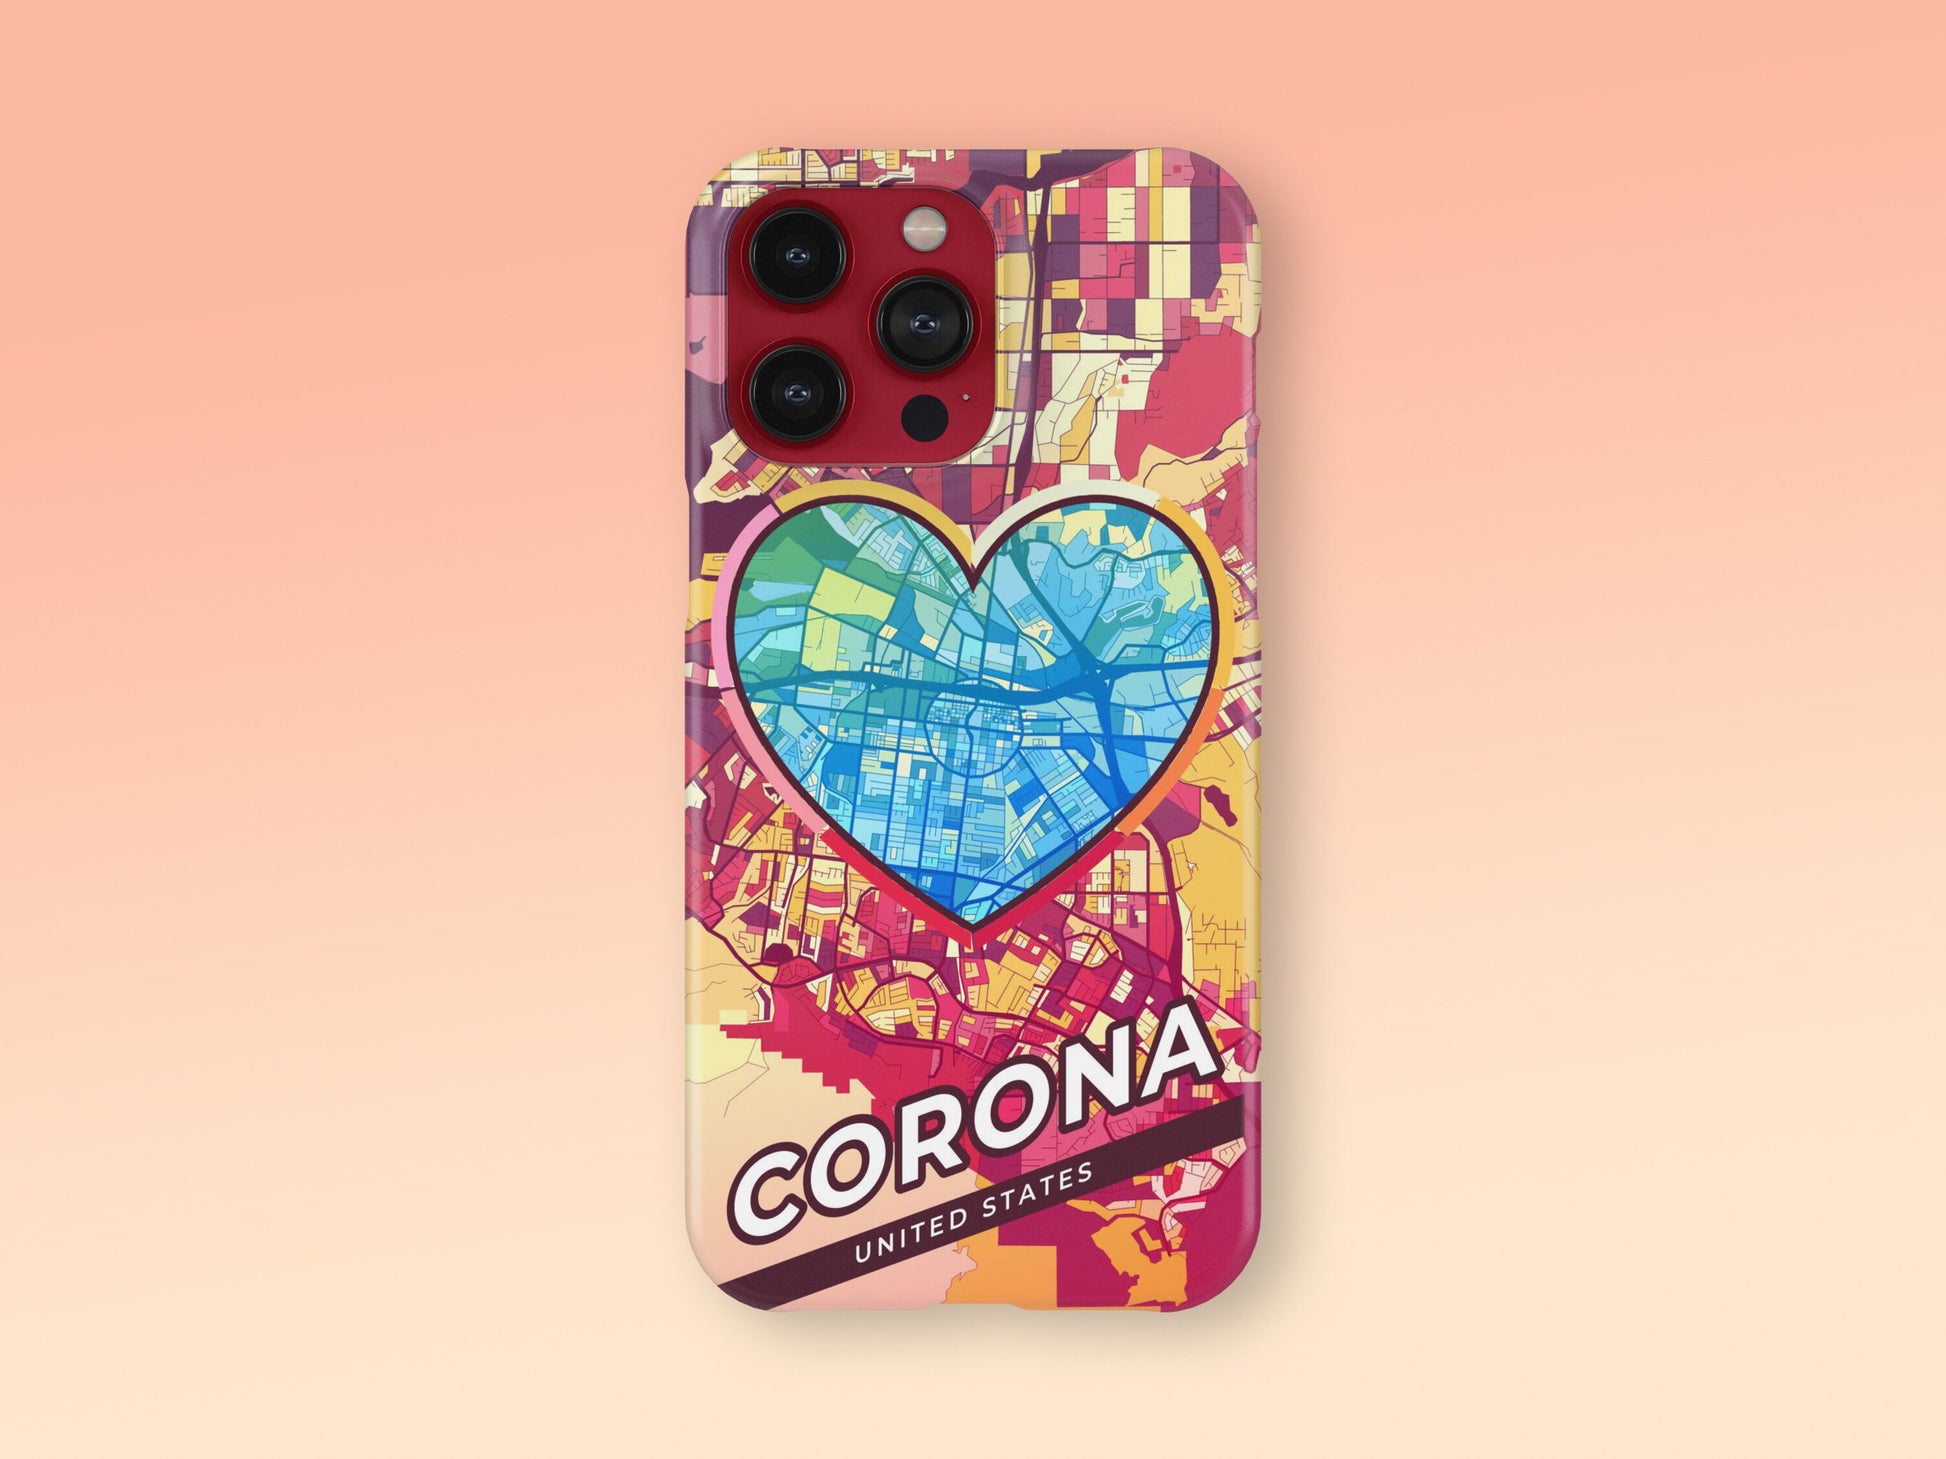 Corona California slim phone case with colorful icon. Birthday, wedding or housewarming gift. Couple match cases. 2